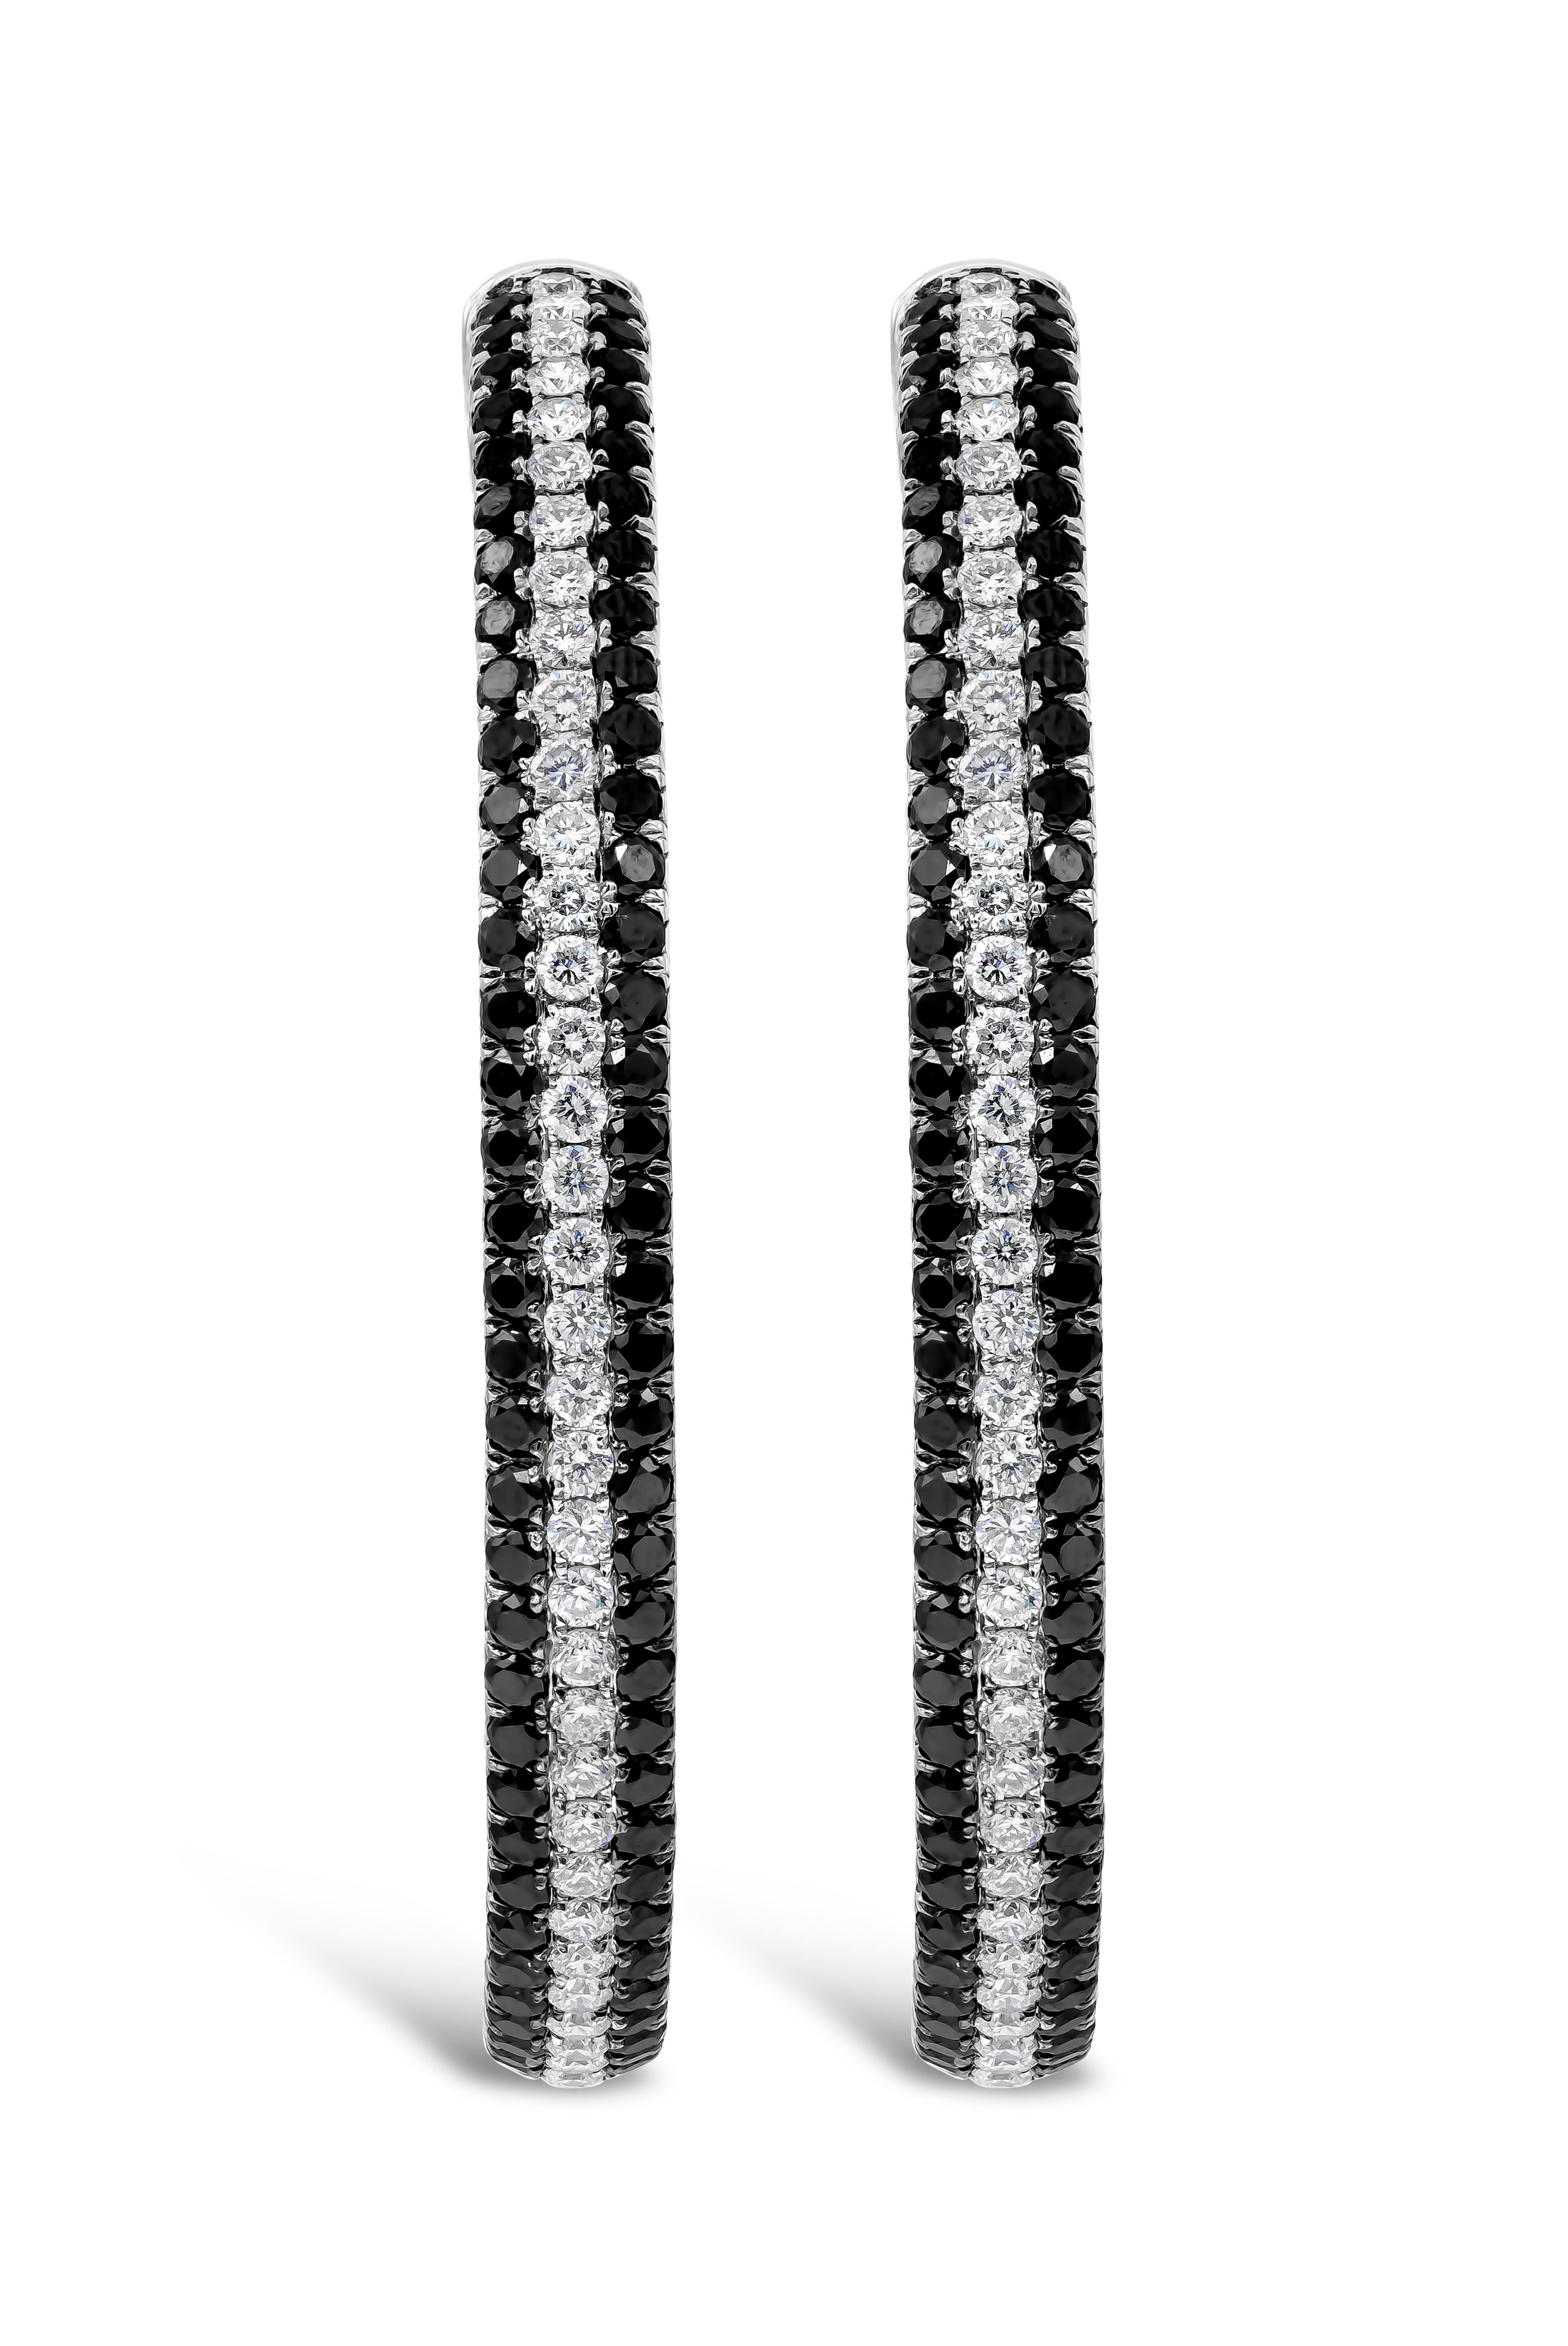 A unique and well crafted pair of hoop earrings showcasing alternating pave set black and white round diamonds set in the inside and outside. Black round diamonds weighs 6.30 carat total, White round diamonds weighs 3.30 carat total. Approximately 2